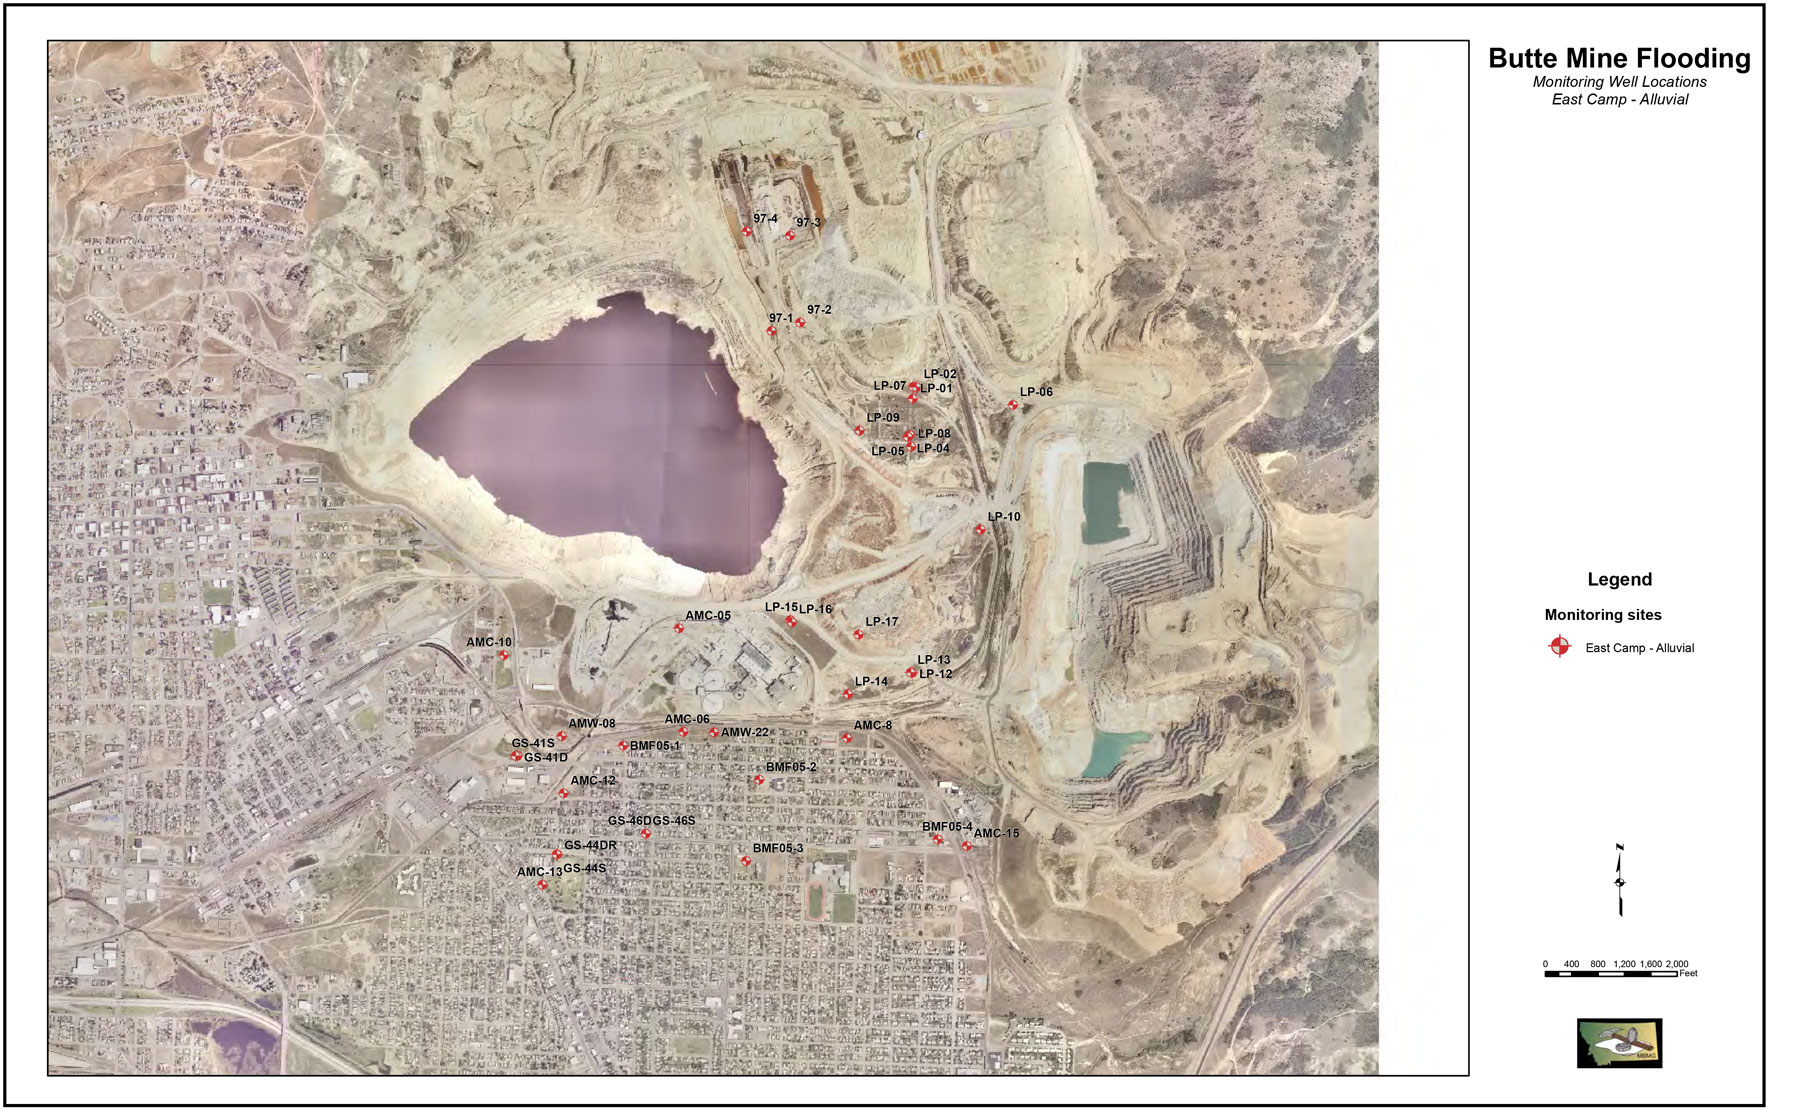 This map shows the locations of groundwater monitoring points for the alluvial aquifer in the East Camp area of the Butte Mine Flooding Operable Unit of the greater Butte Superfund site.